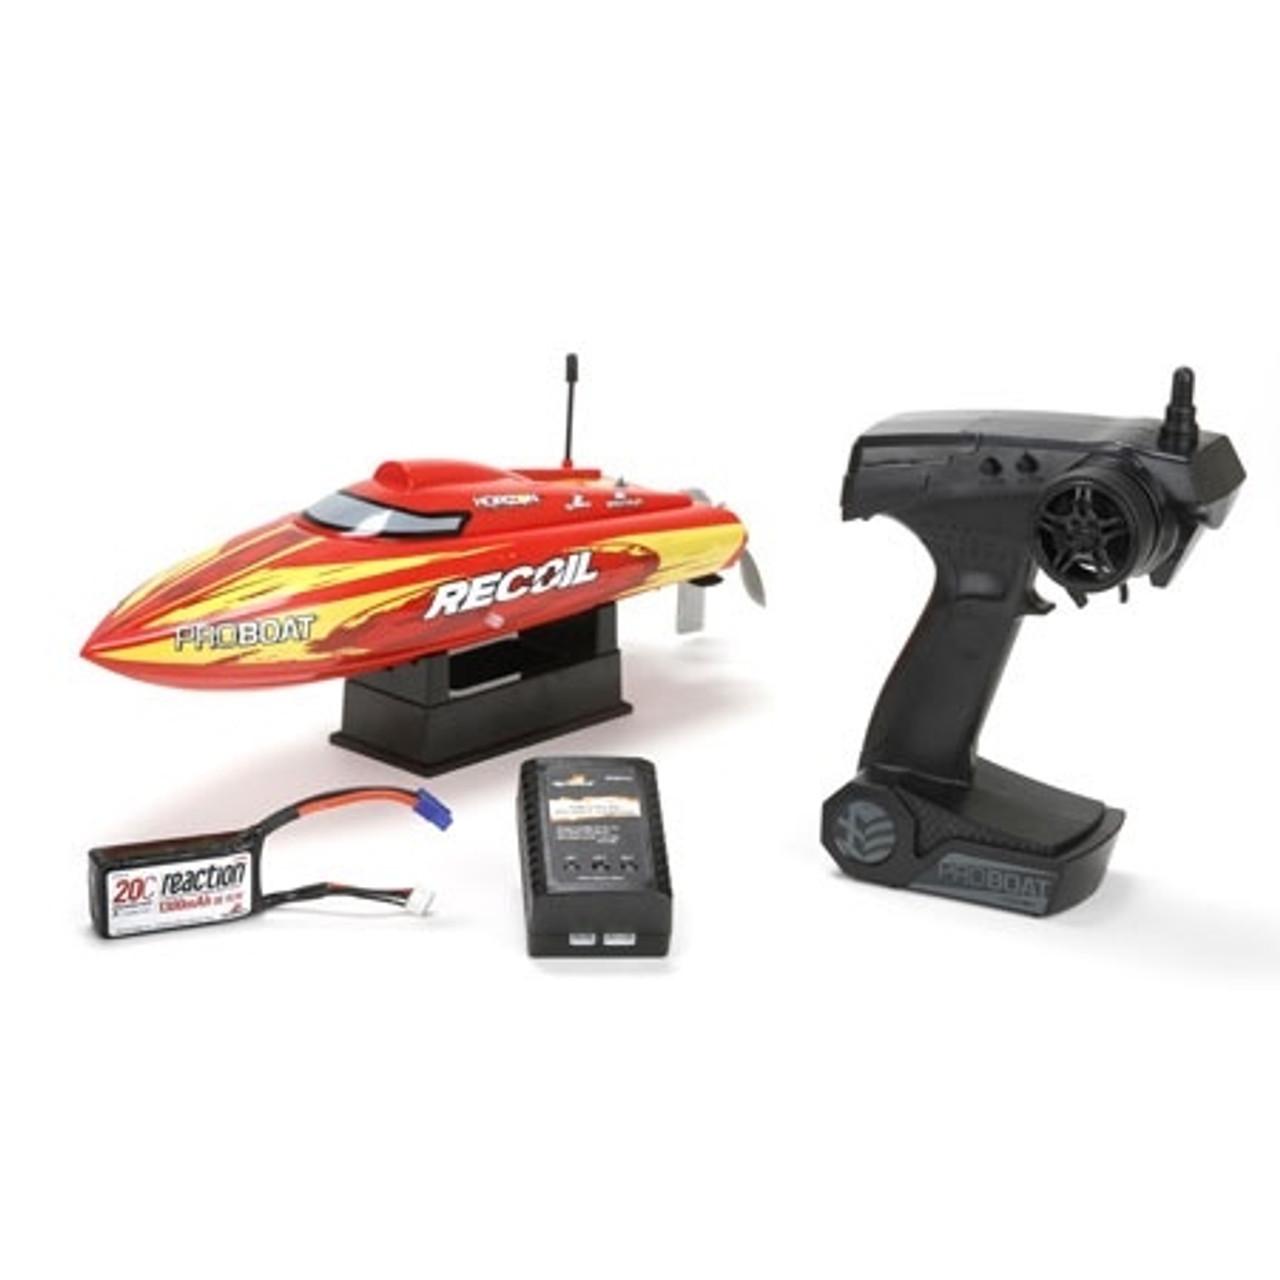 Unleash the Thrill with the Recoil RC Boat